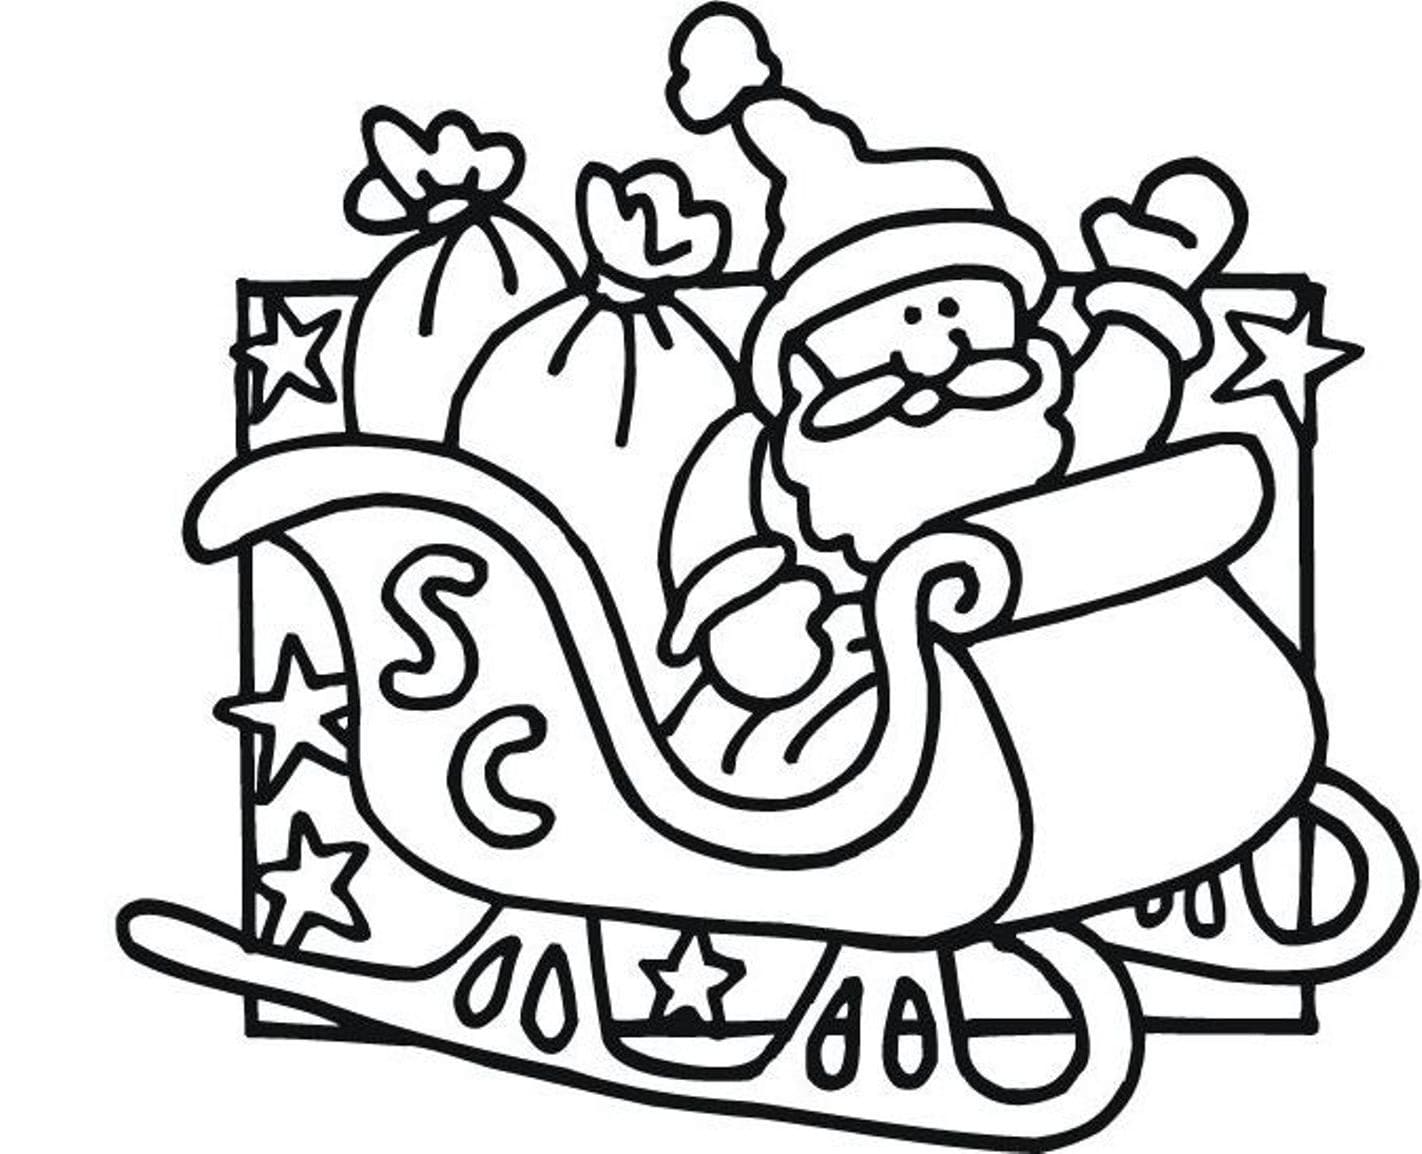 Santa on sleigh coloring page